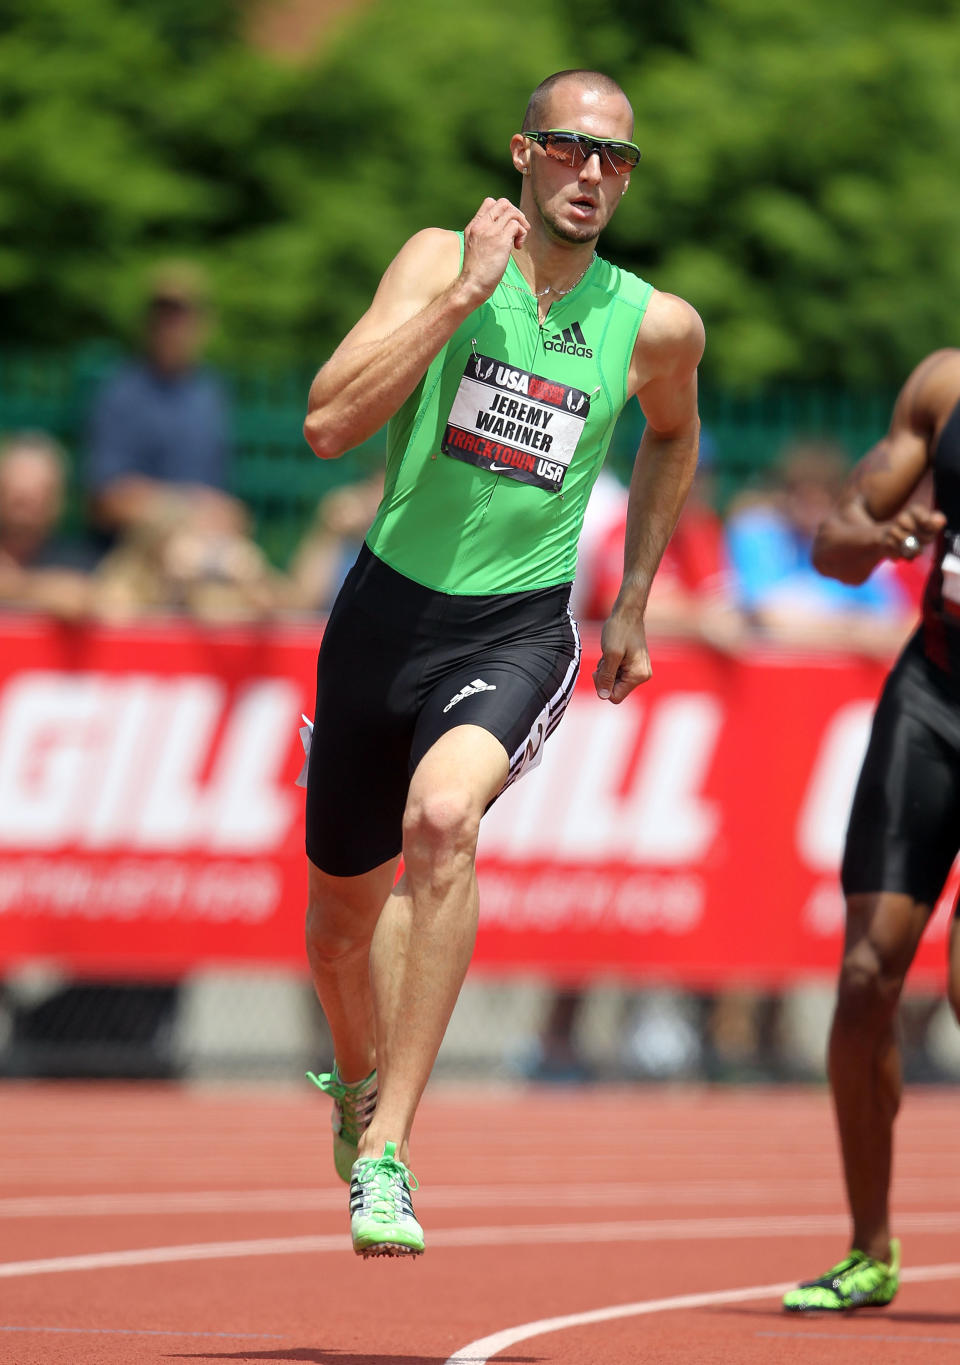 EUGENE, OR - JUNE 25: Jeremy Wariner runs in the Men's 400 meter during the 2011 USA Outdoor Track & Field Championships at Hayward Field on June 25, 2011 in Eugene, Oregon. (Photo by Andy Lyons/Getty Images)